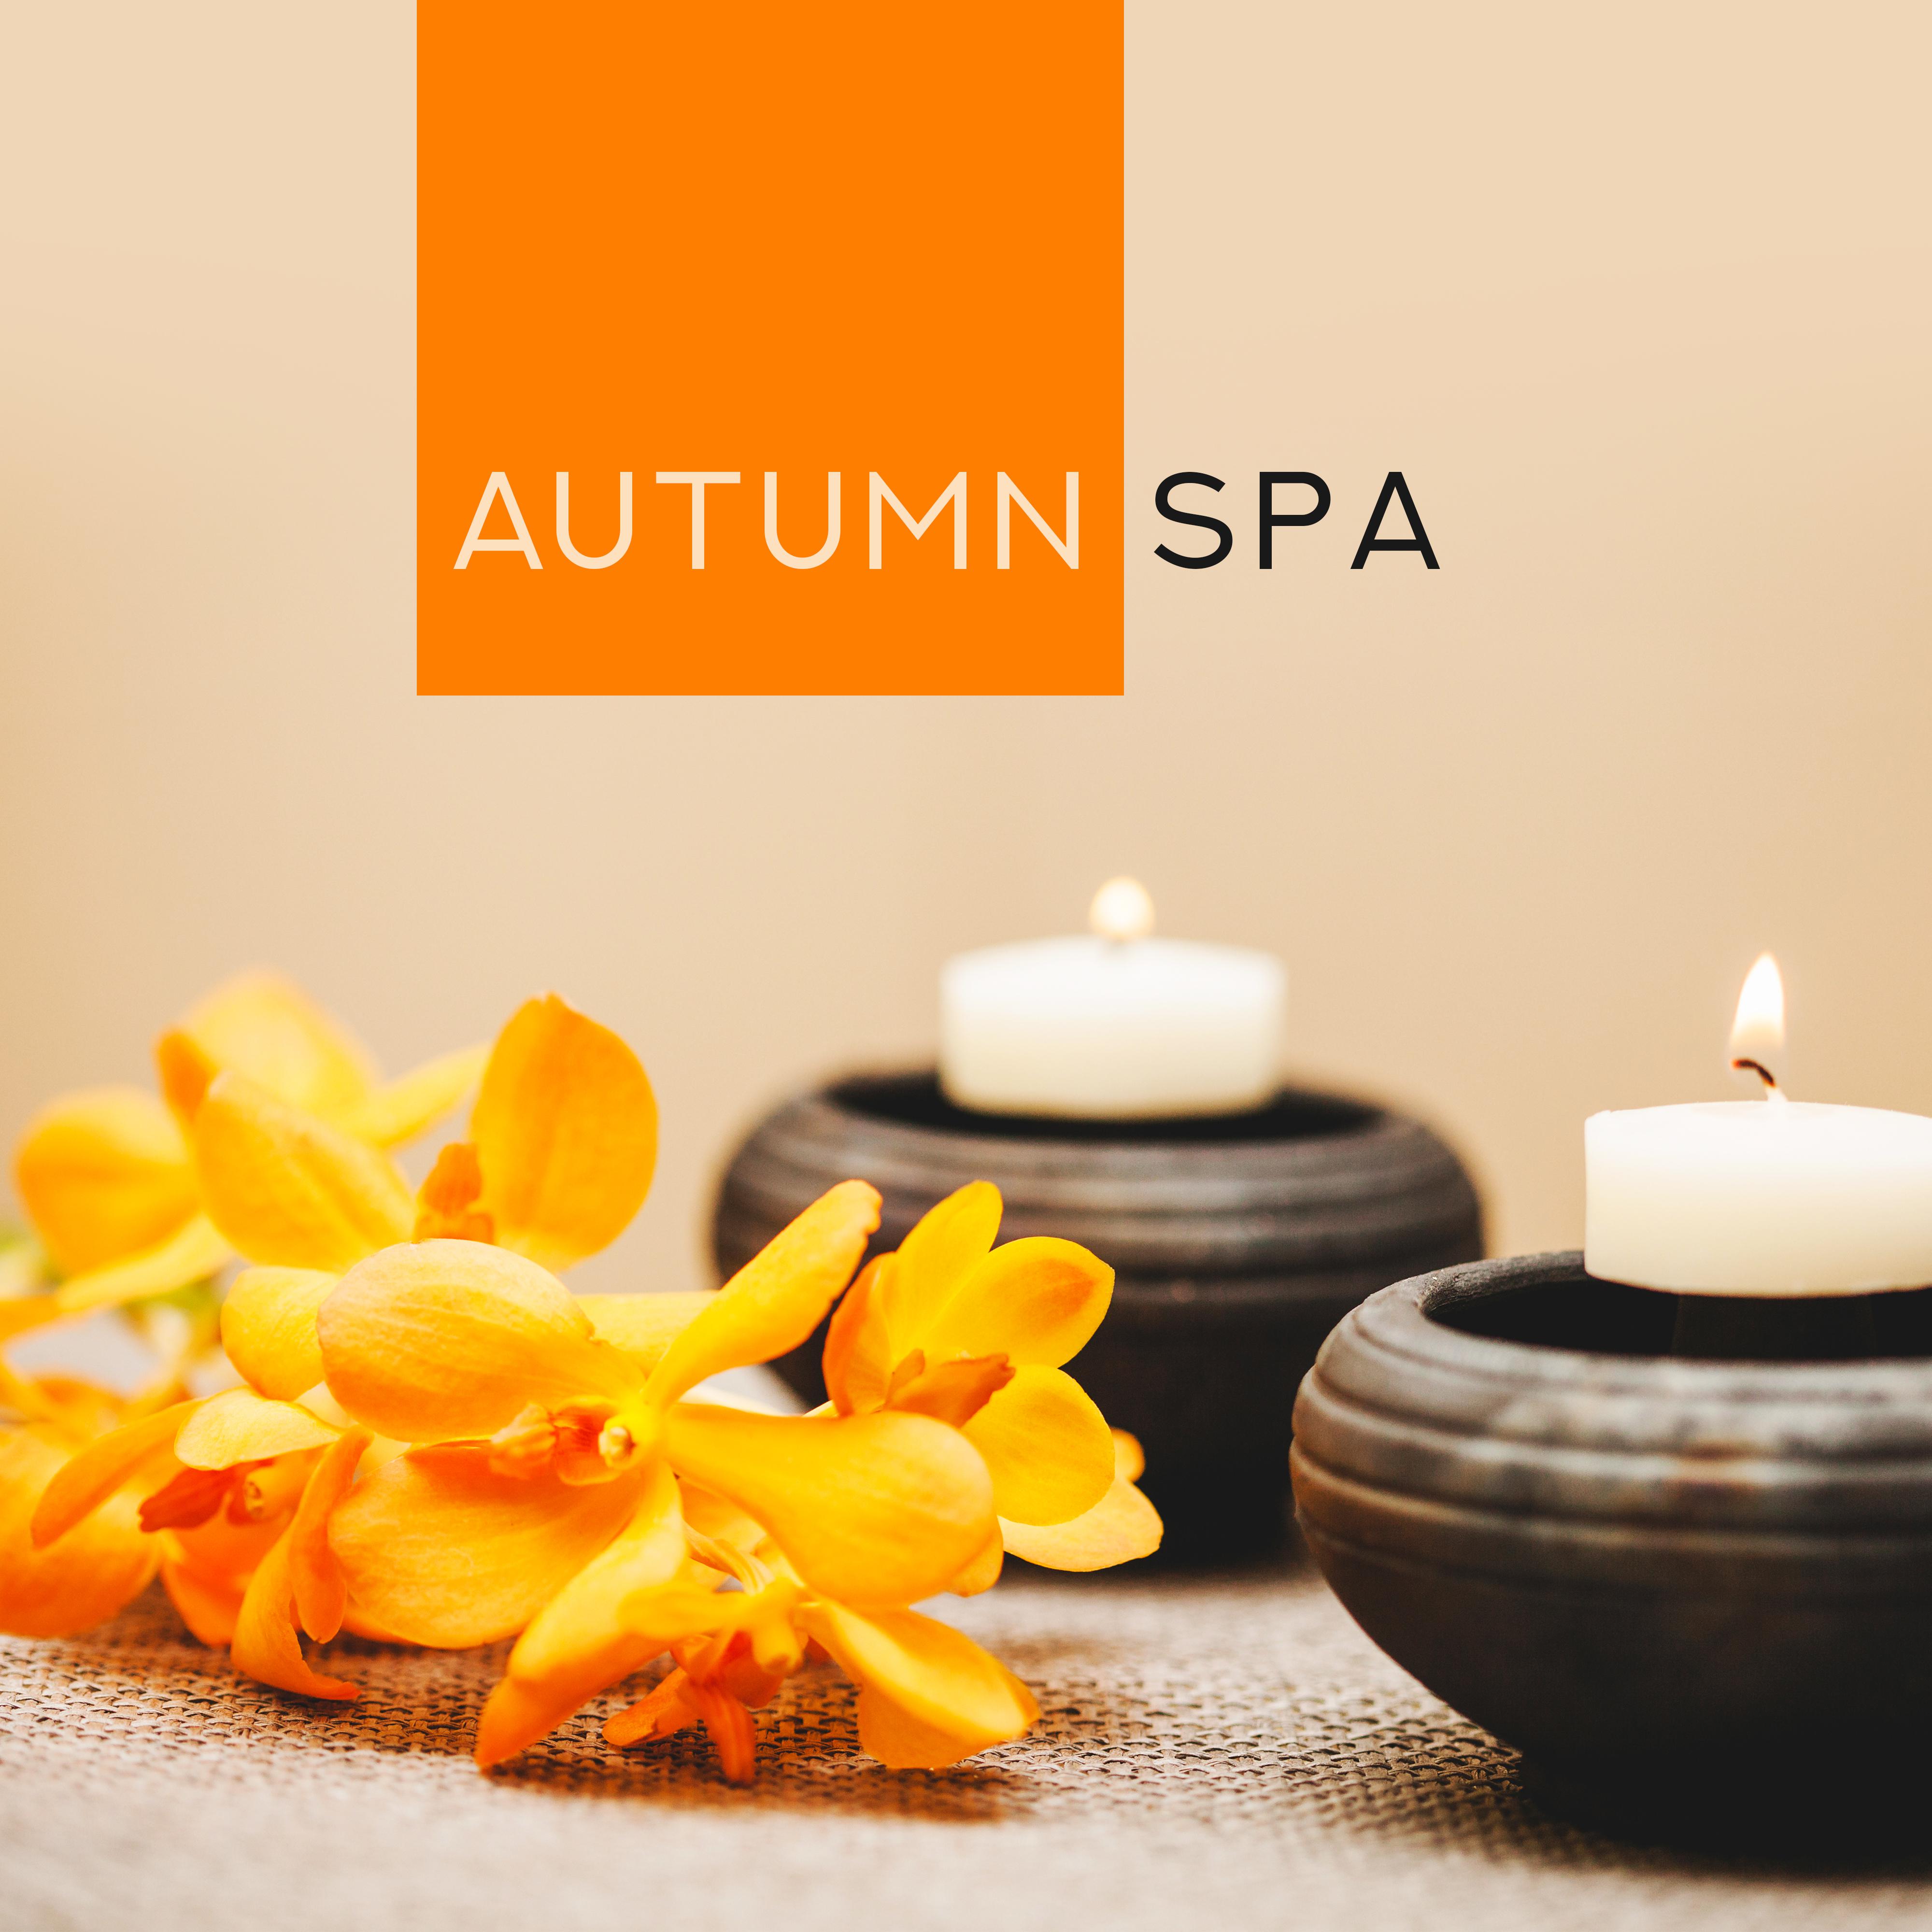 Autumn Spa – Soothing Sounds for Spa, Wellness, Relaxing Therapy, Music for Relaxation